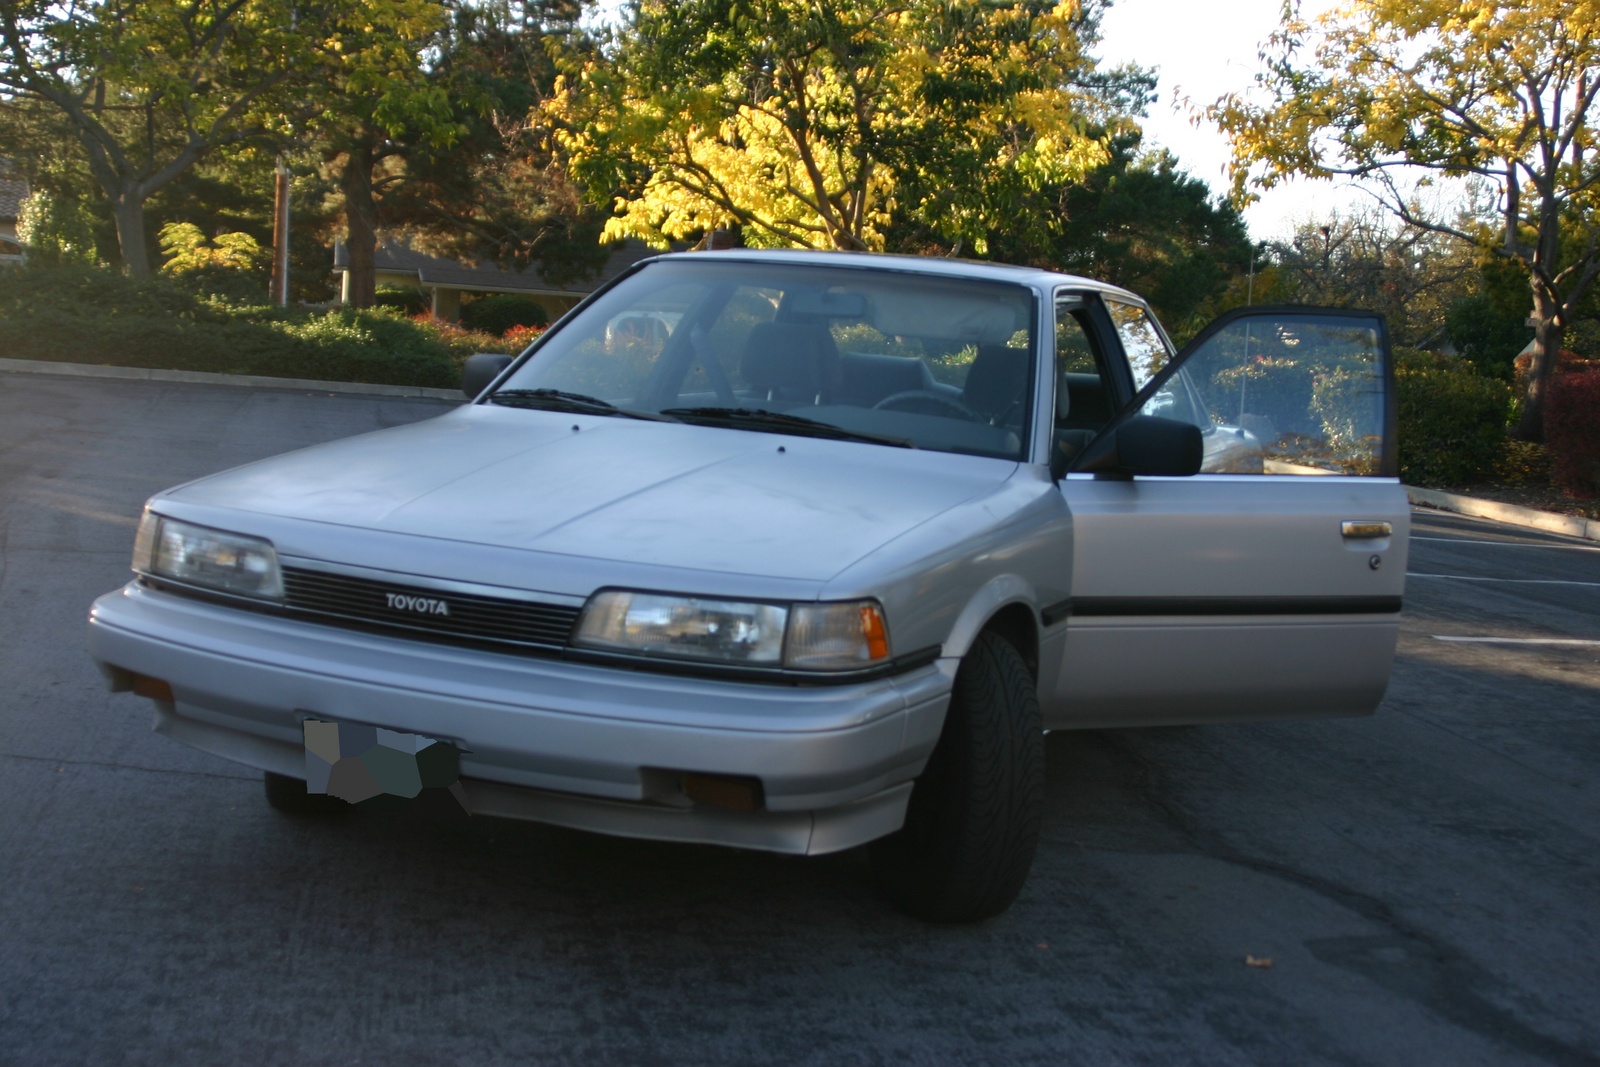 1995 toyota camry station wagon reviews #6